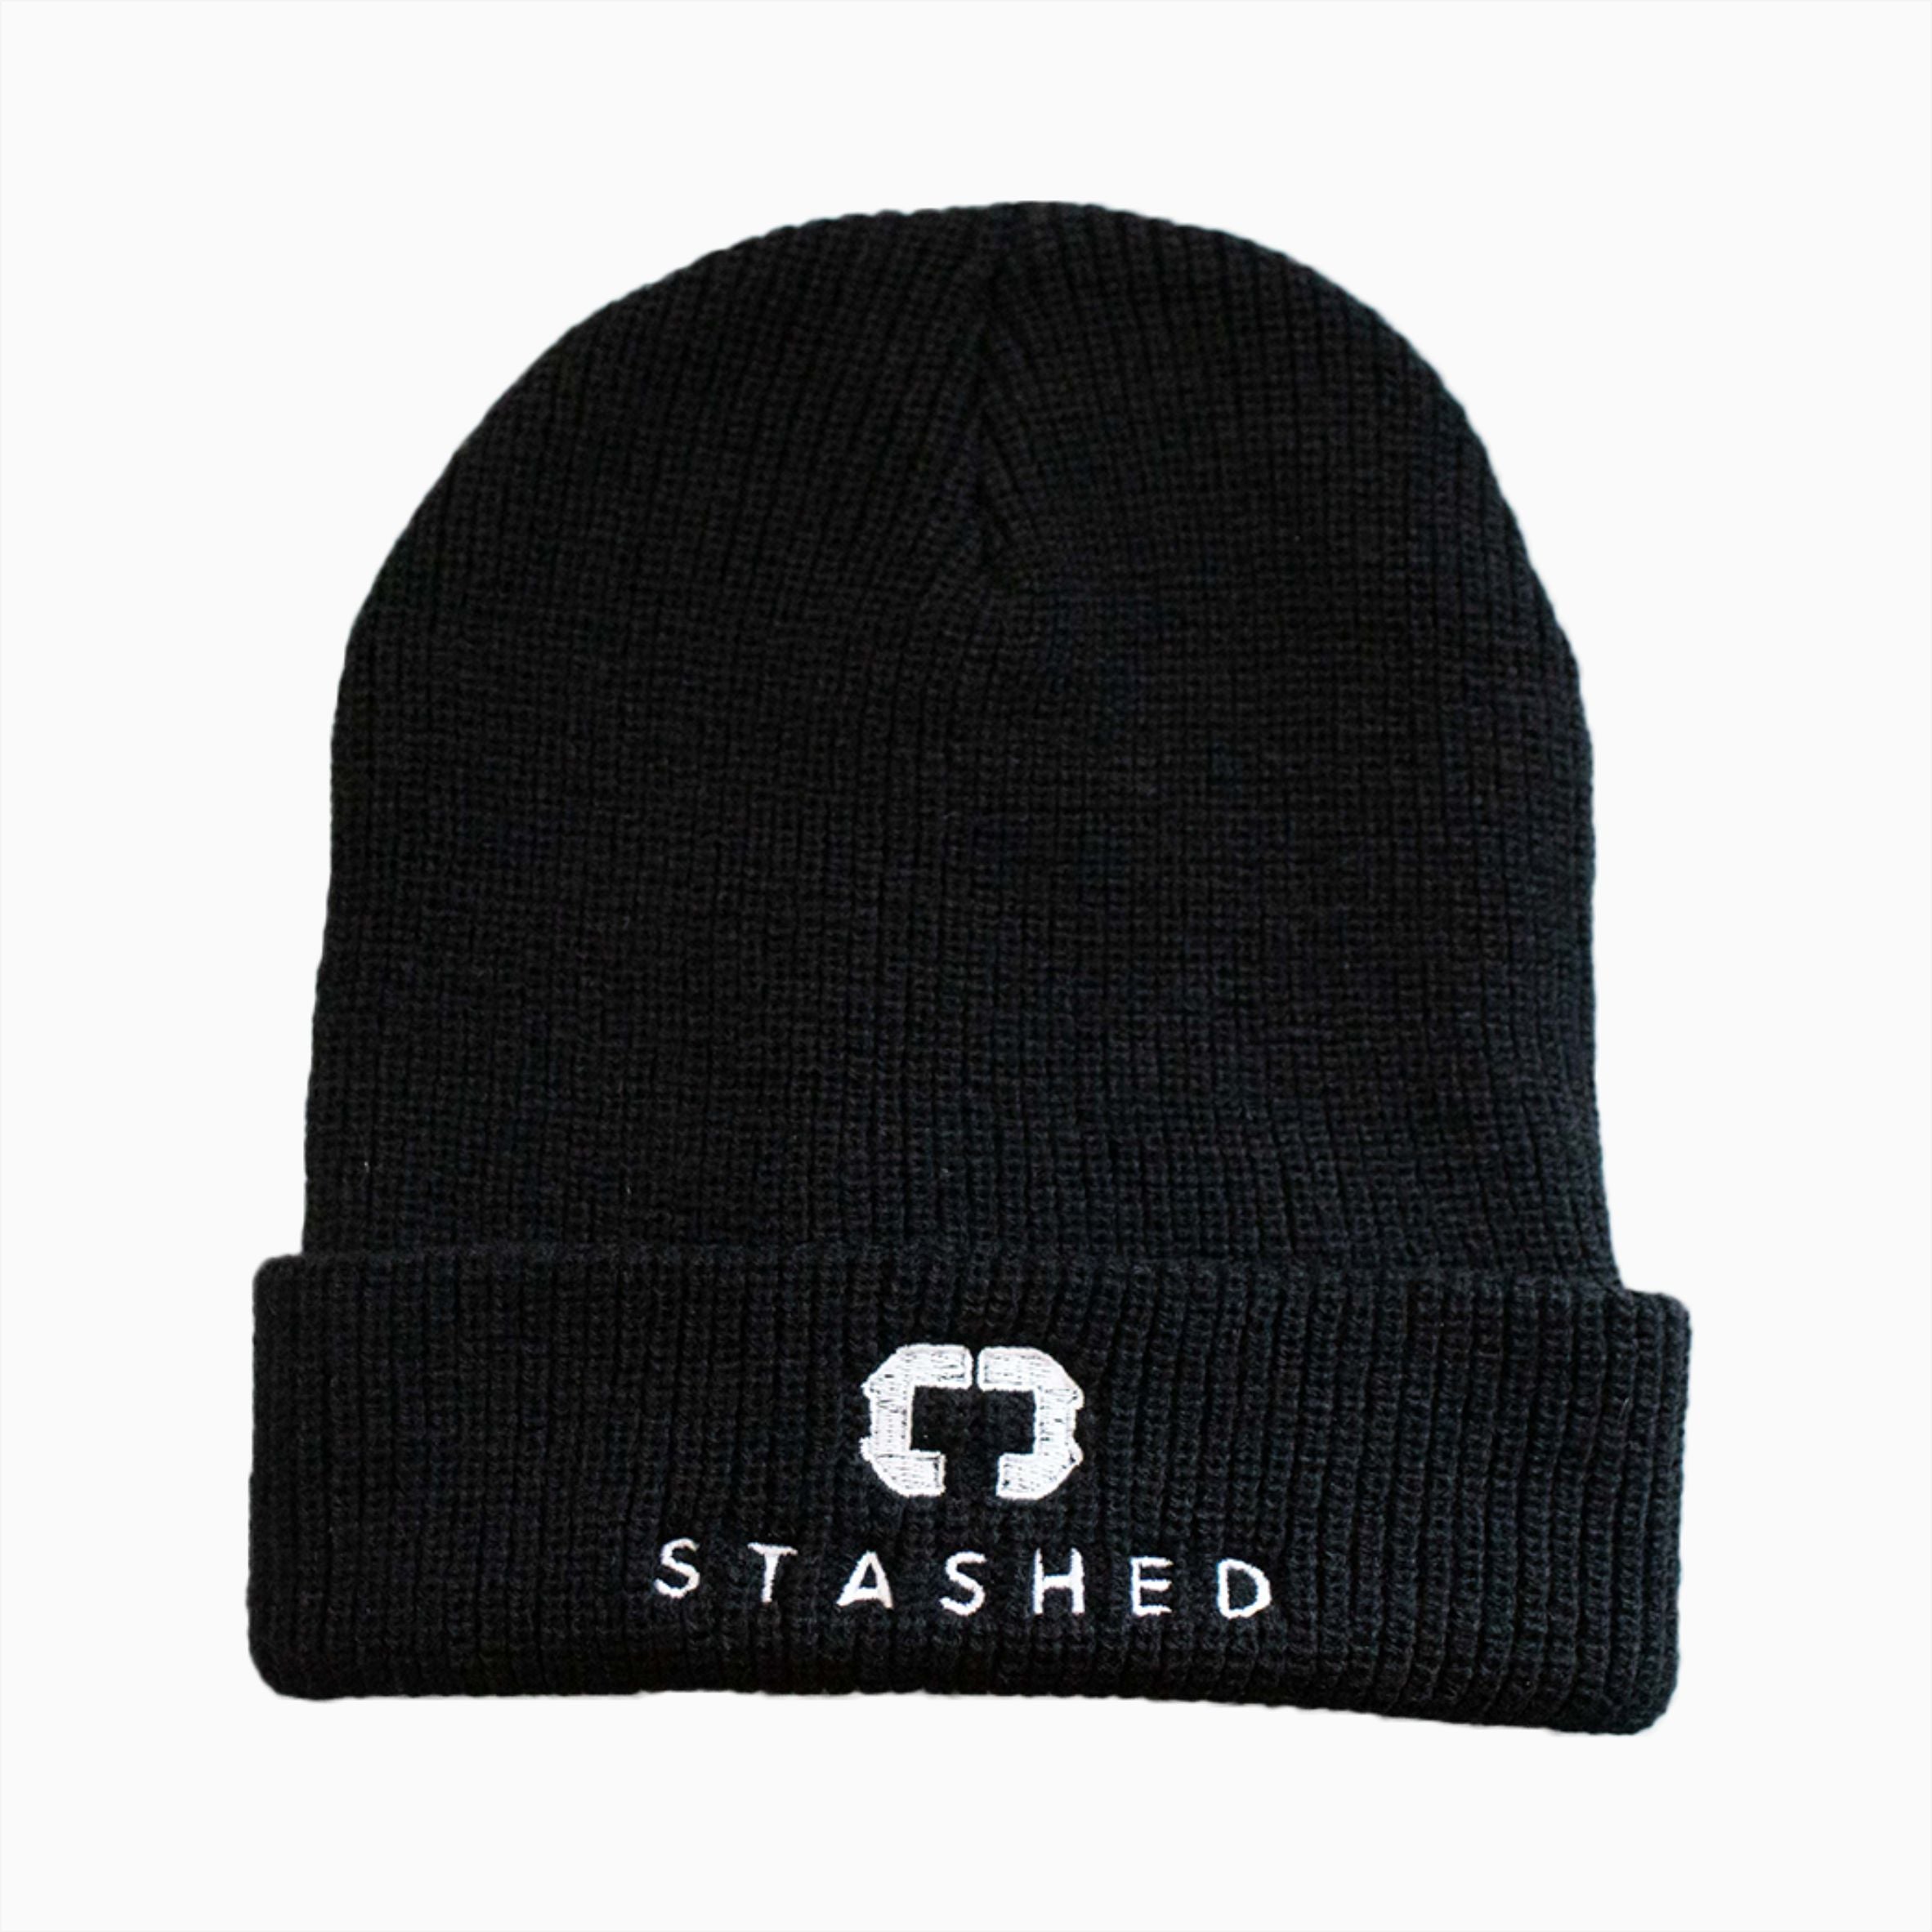 Stashed Products Beanie Hat - Black